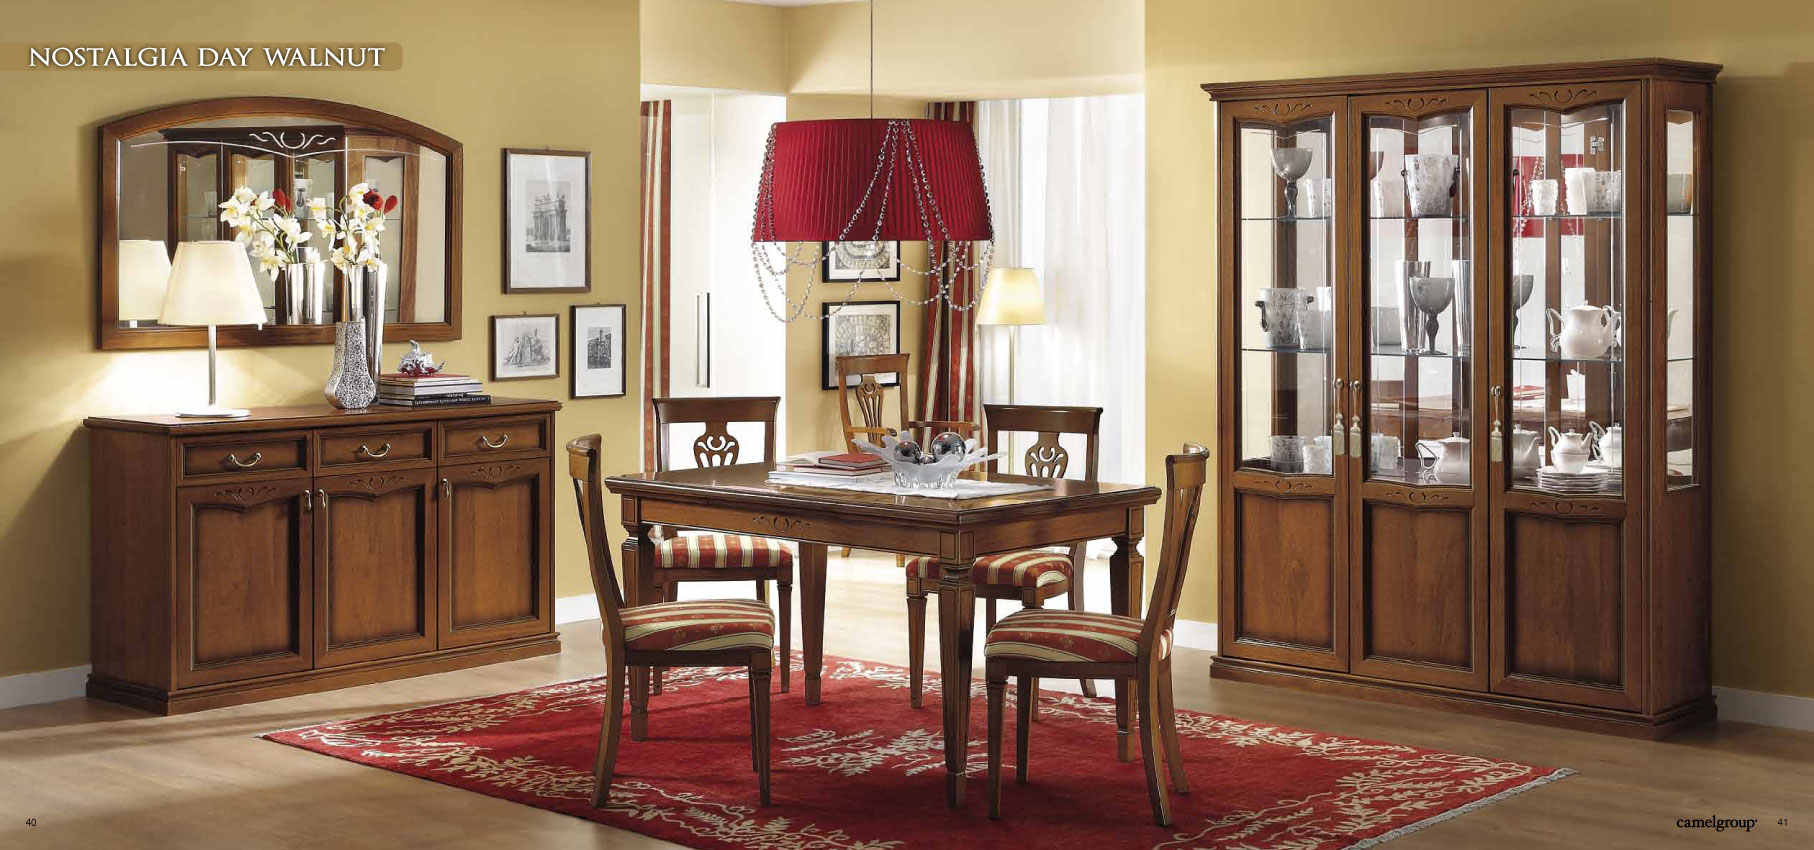 Dining Room Furniture China Cabinets and Buffets Nostalgia Day Walnut